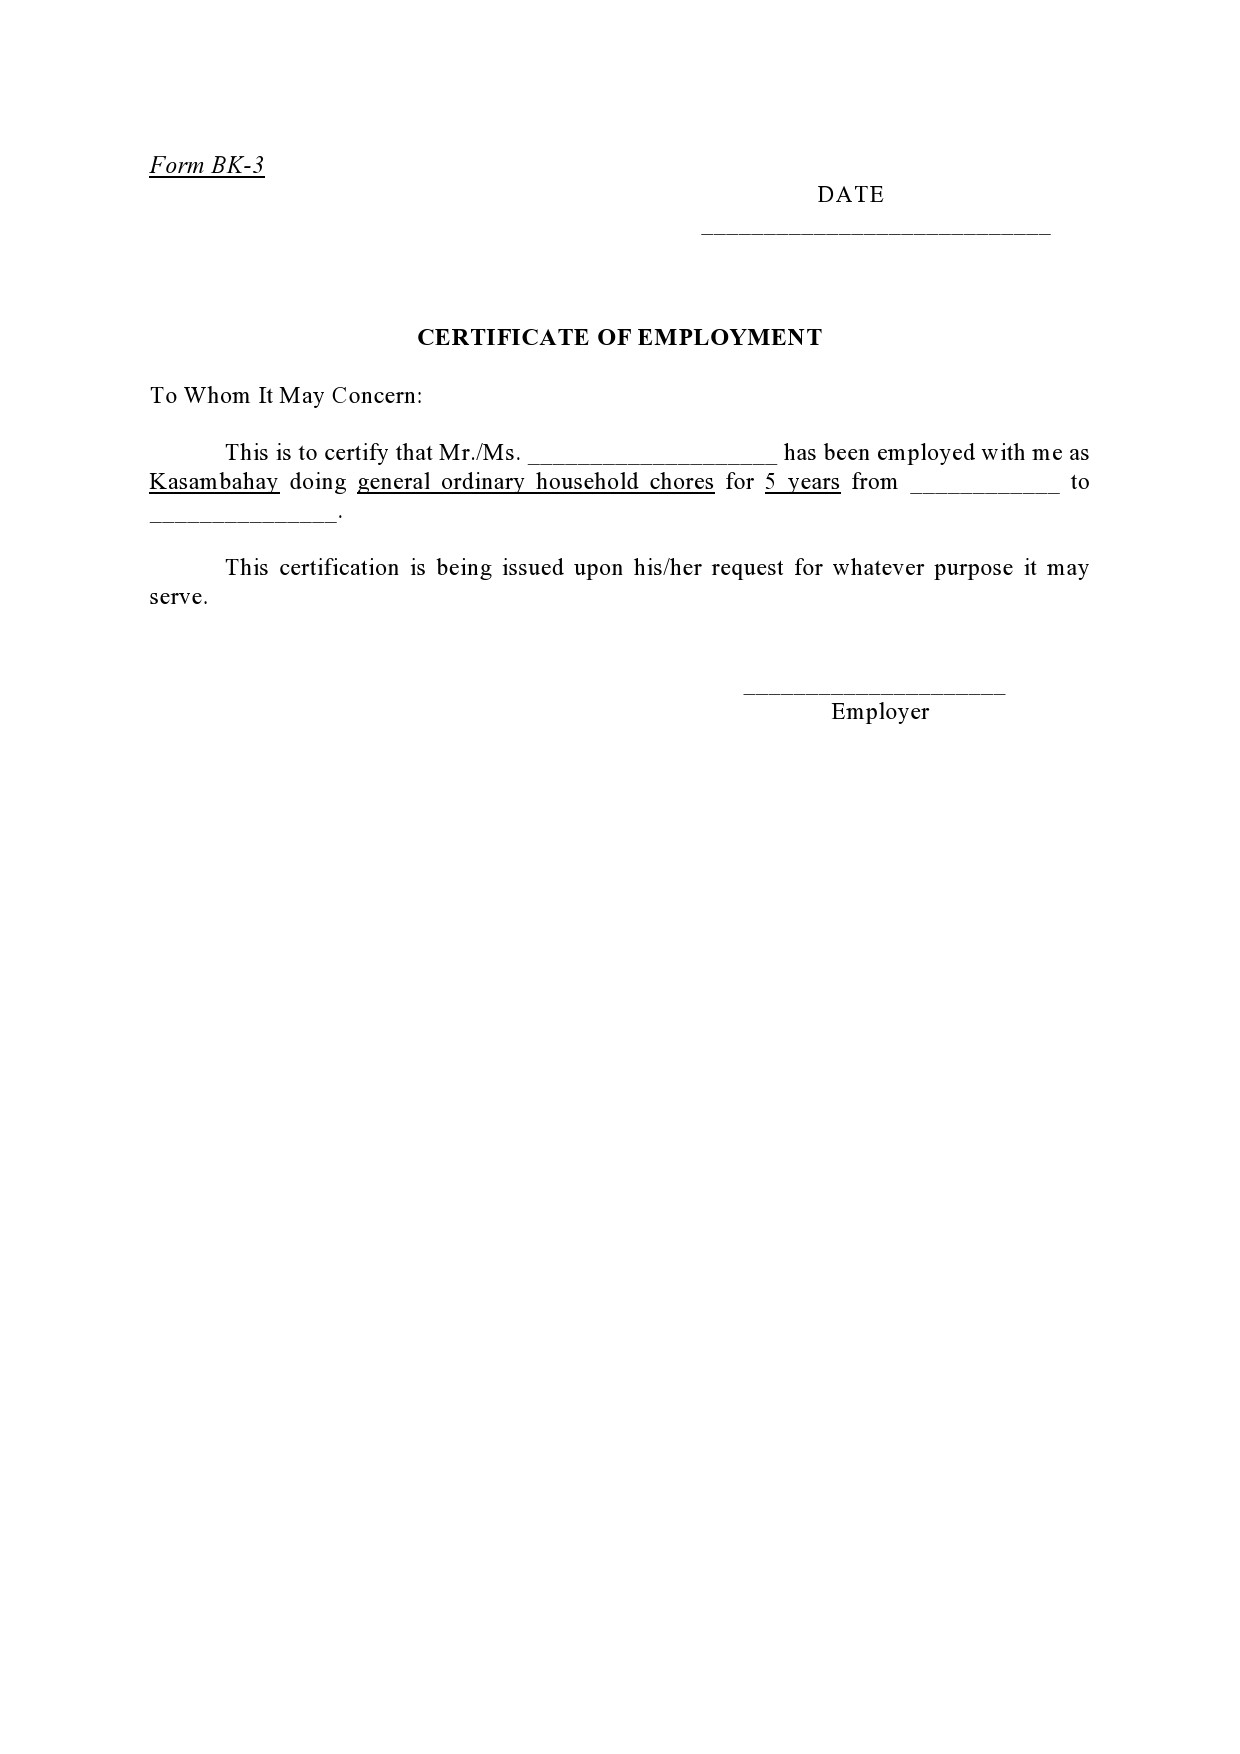 certificate of application 15 august